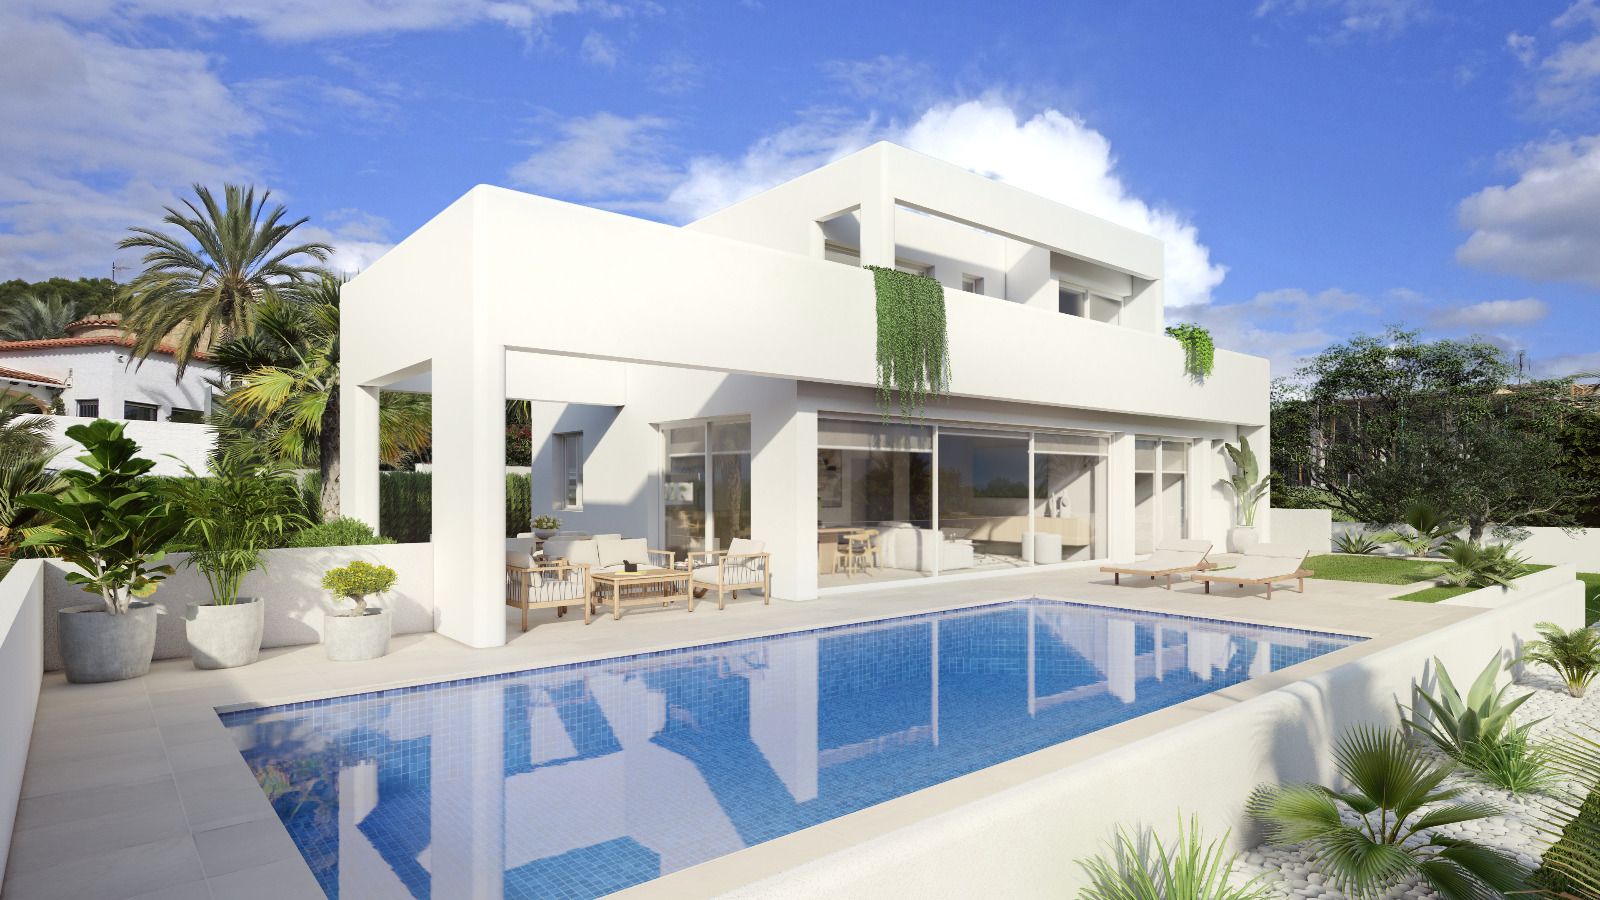 Magnificent luxury villa, Ibiza style, with beautiful views to the sea and the Peñon d'Ifach